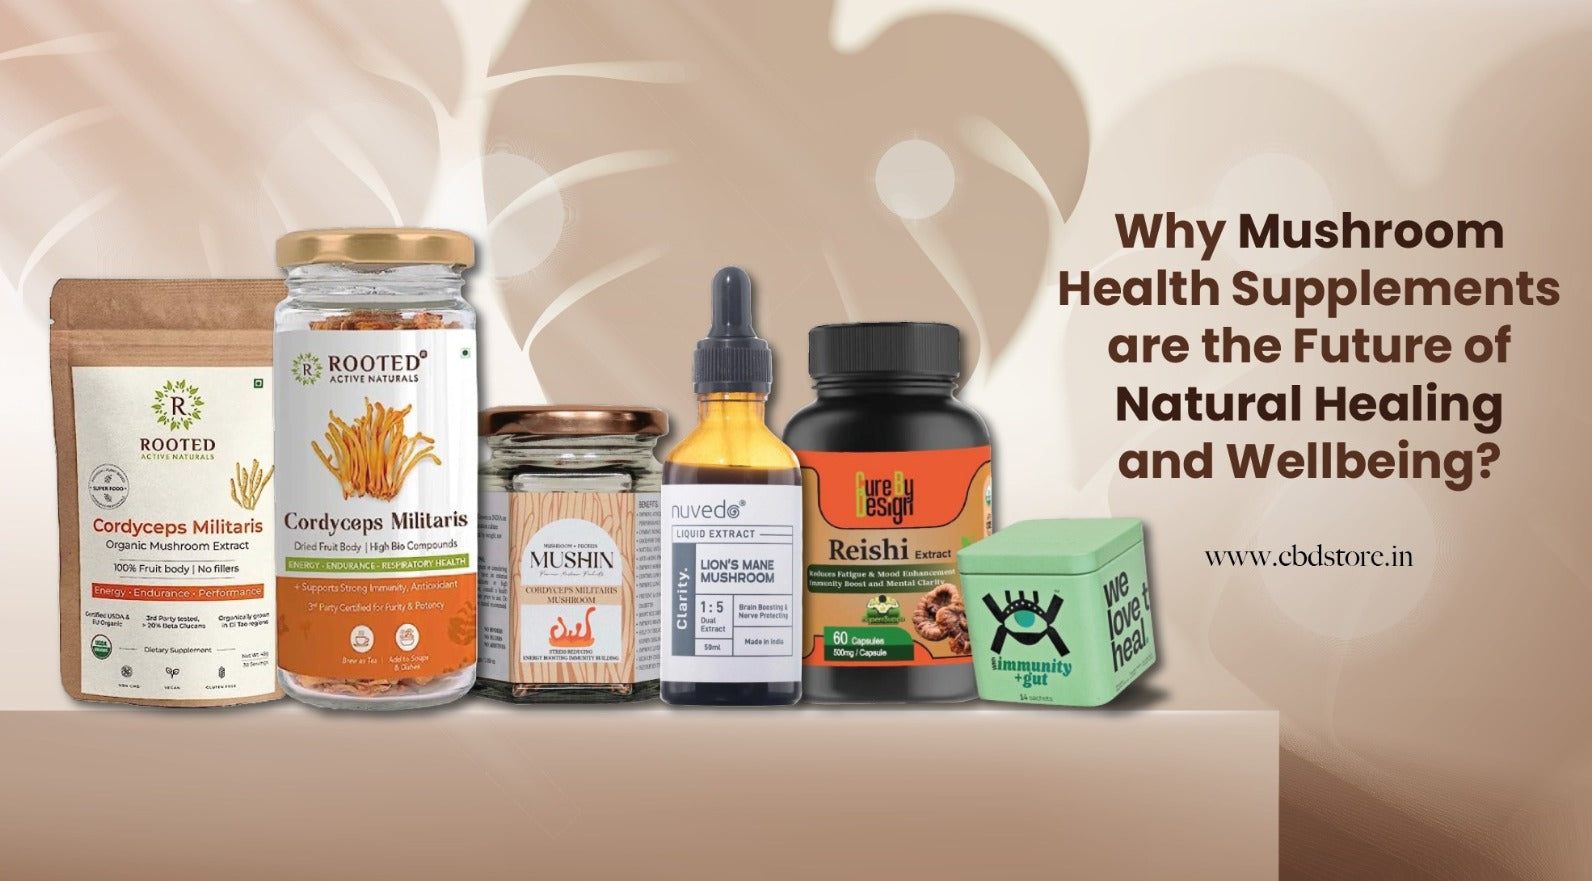 Why Mushroom Health Supplements are the Future of Natural Healing and Wellbeing - CBD Store India